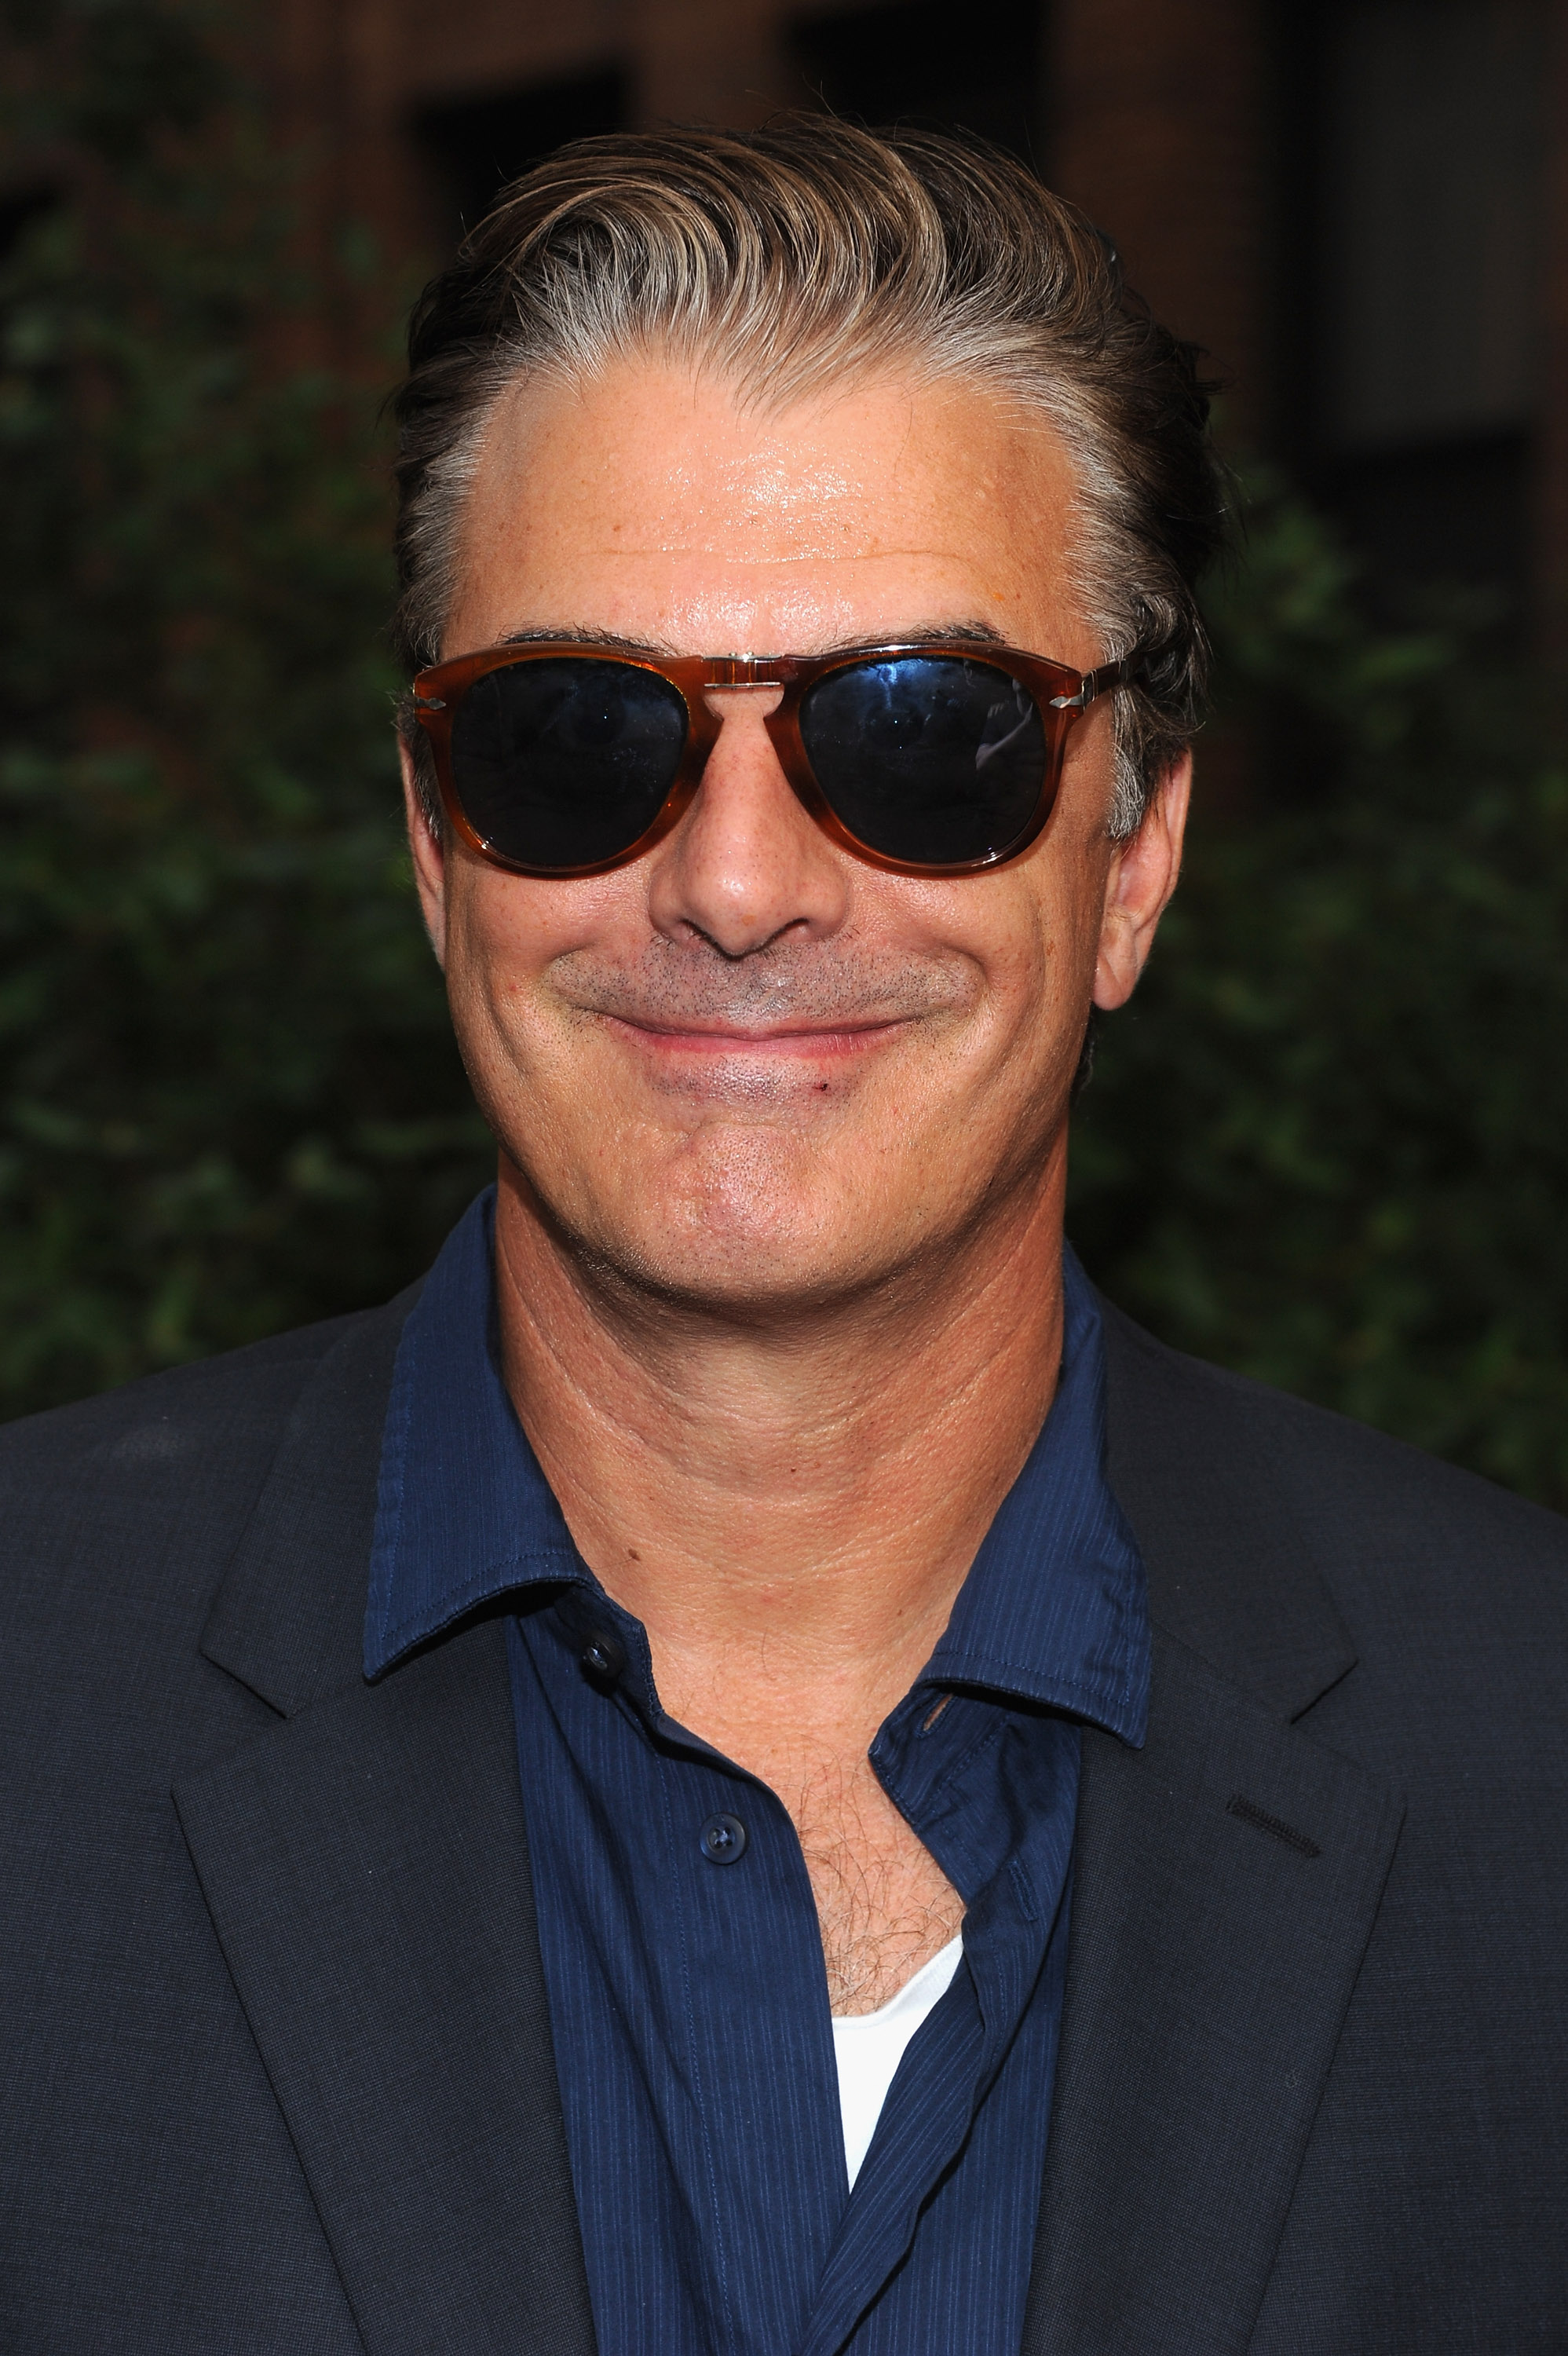 More Pictures Of Chris Noth. chris noth scandal. 